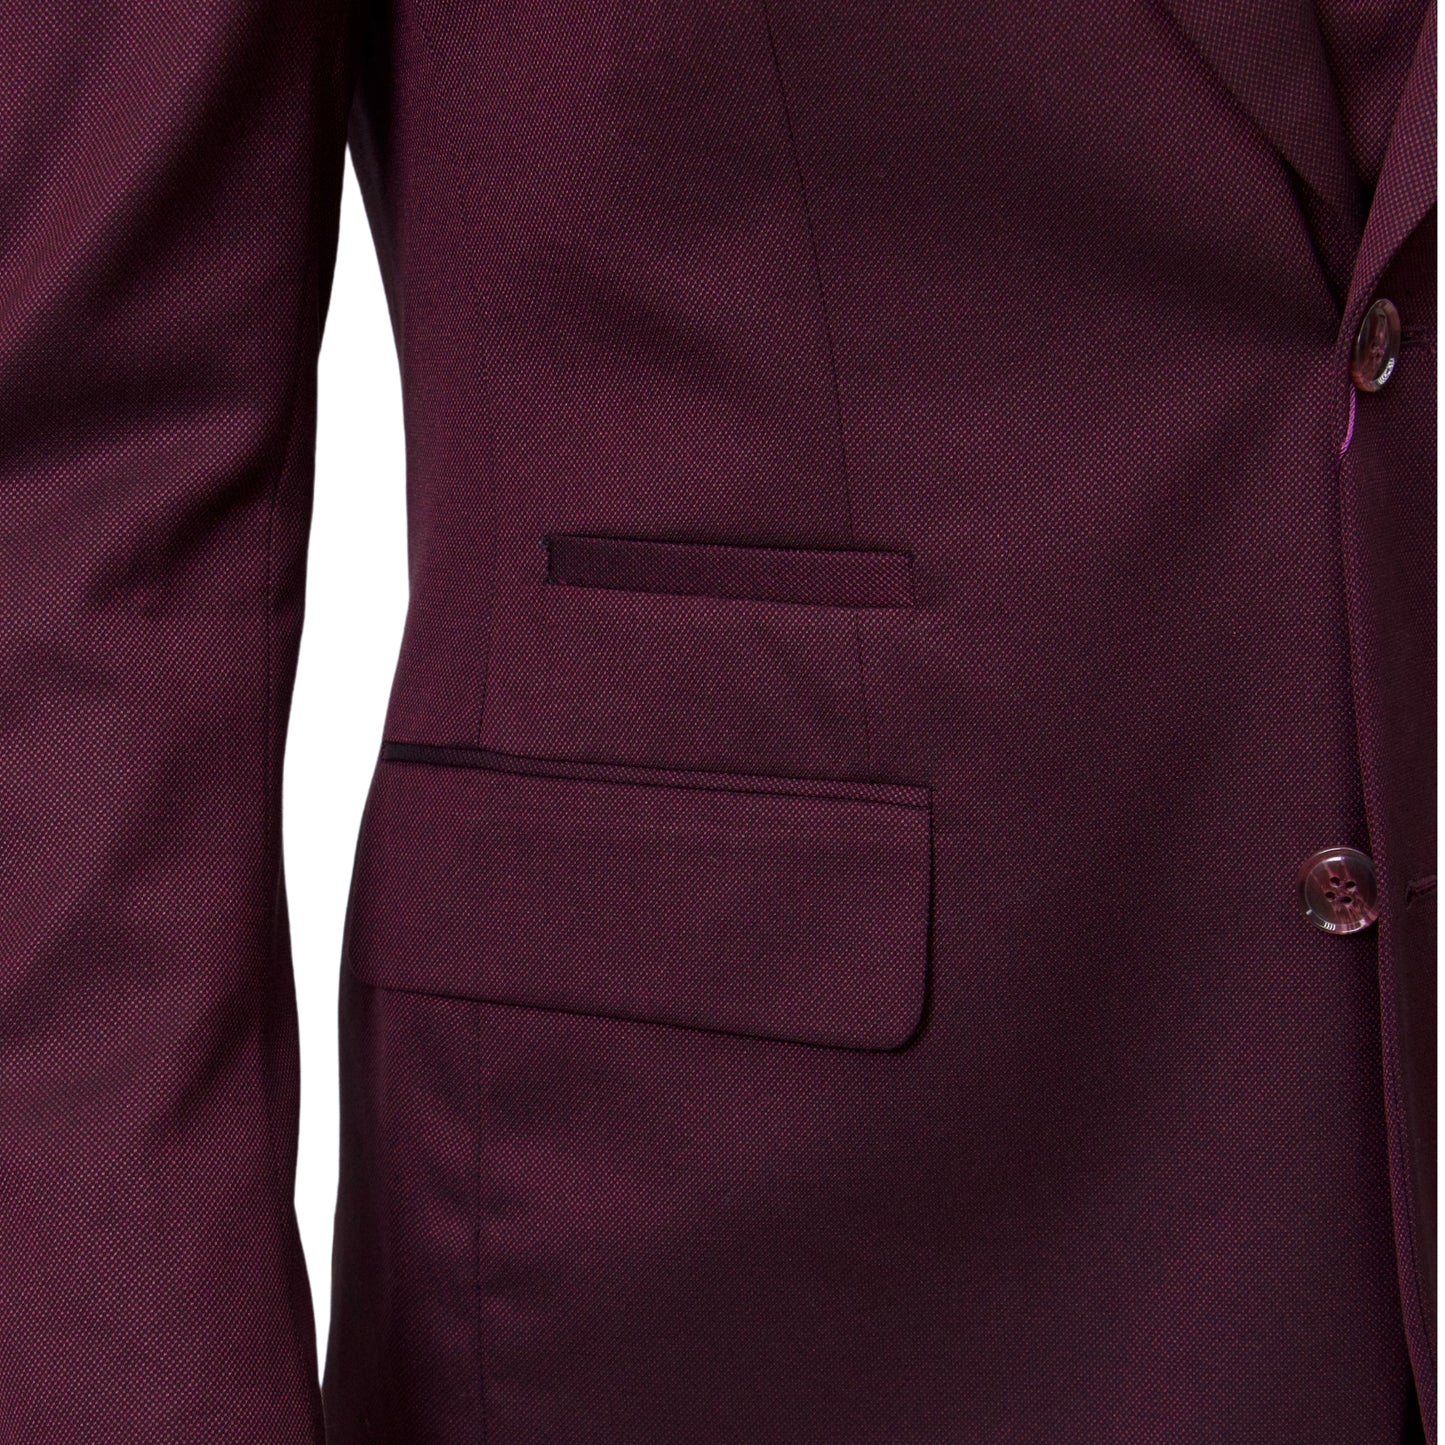 Royal Luxe Modern Fit Burgundy Vested Suit